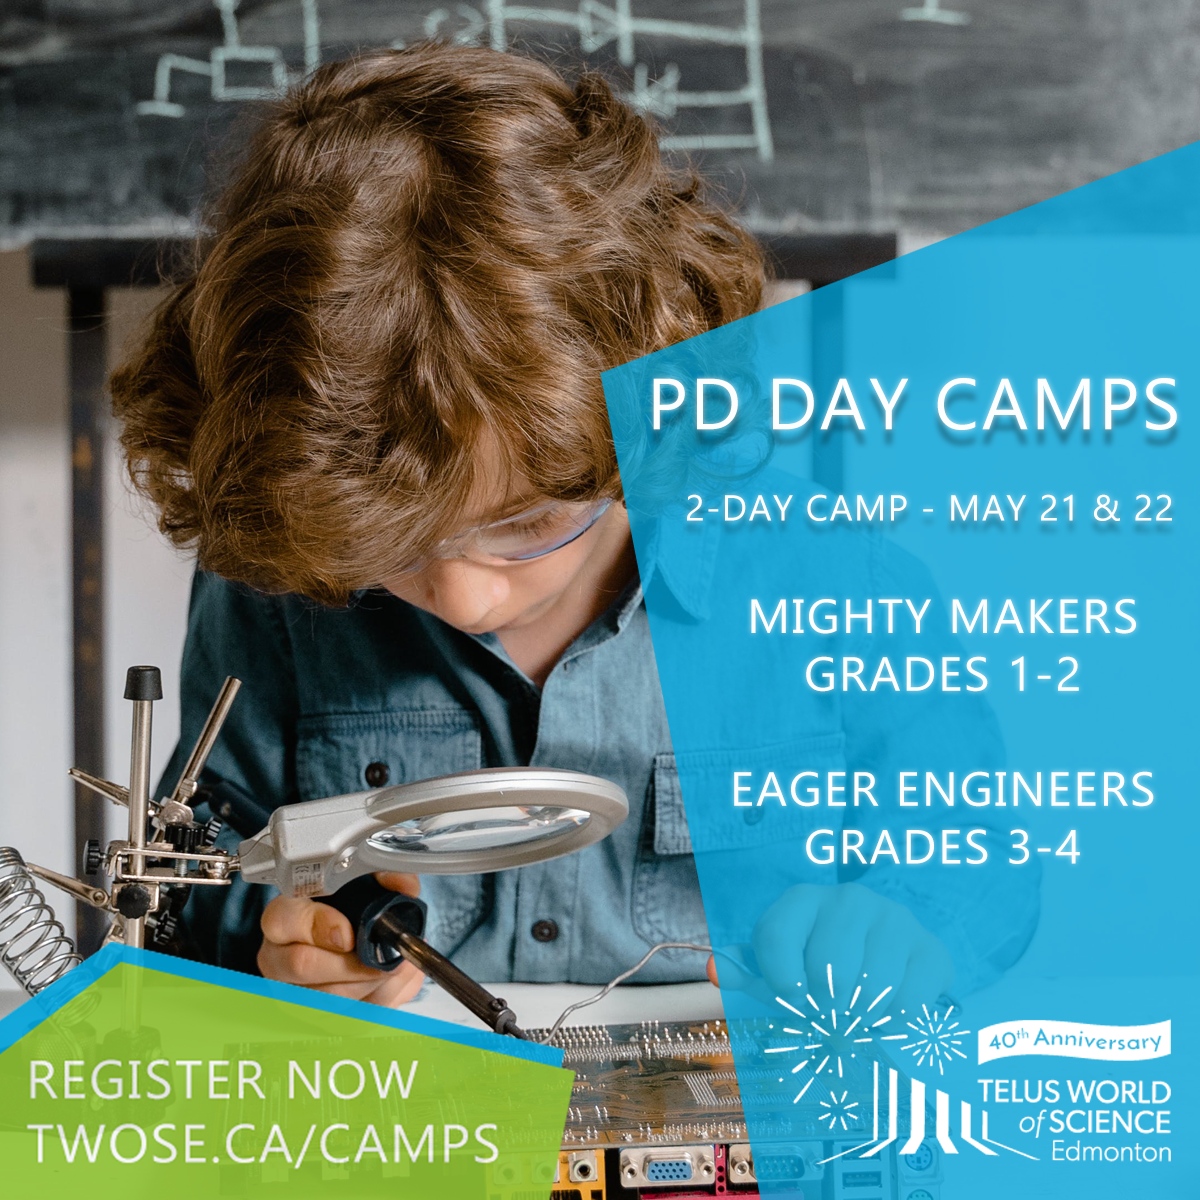 🌟 Hey, Parents! 🌟 Keep your little ones engaged on PD days with our 2-day camp this month on May 21 and 22! 👉 Mighty Makers - Grades 1-2 🧐🔍 👉 Eager Engineers - Grades 3-4 🧑‍🔬 Book now at twose.ca/camps